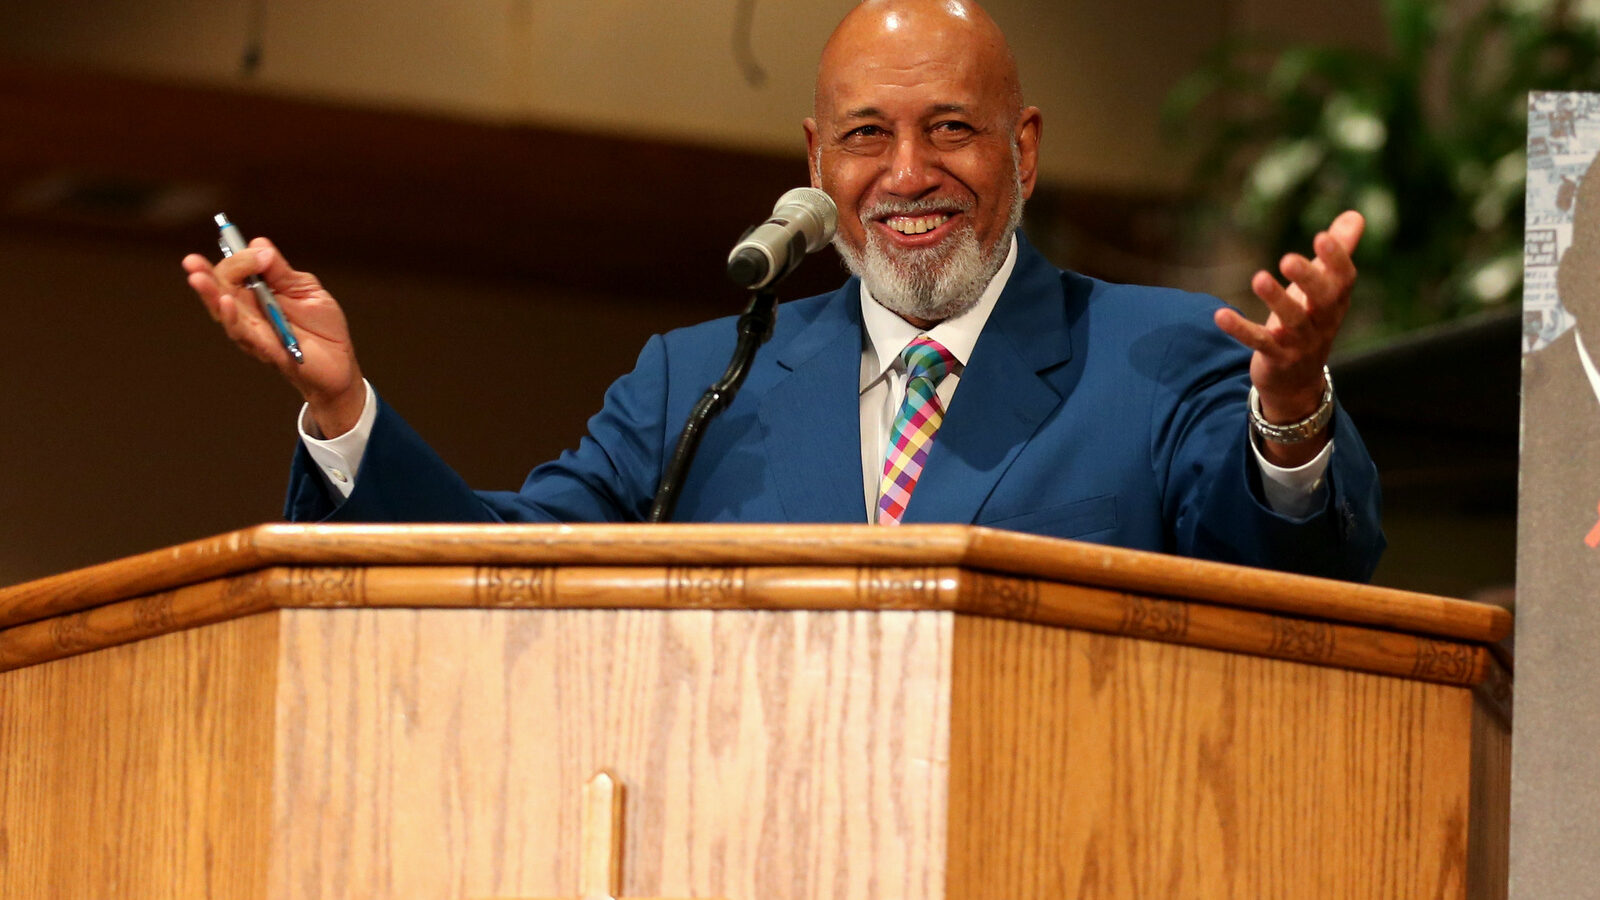 US Congressman Alcee Hastings speaks at a town hall discussion on Wednesday, April 23, 2014 in Ft. Lauderdale Fl. (Tom DiPace/AP)